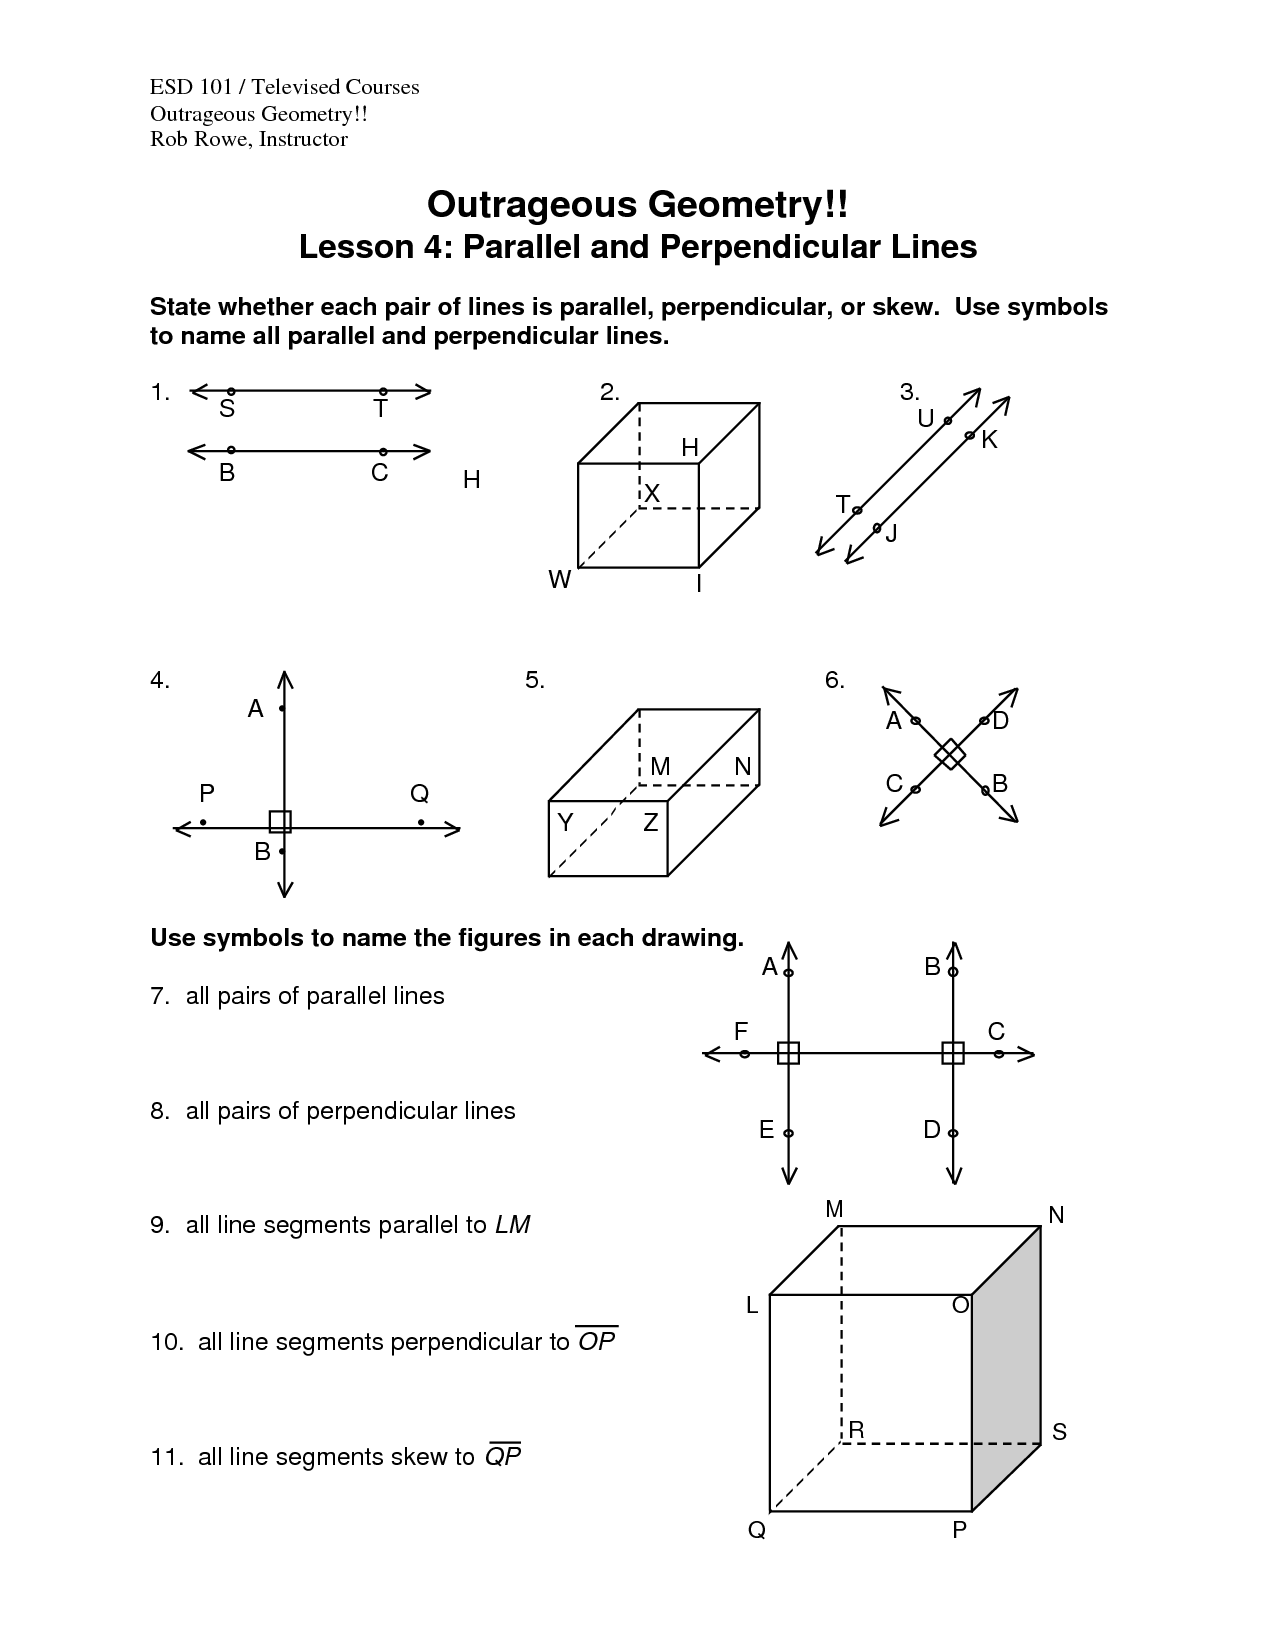 Geometry Parallel and Perpendicular Lines Image